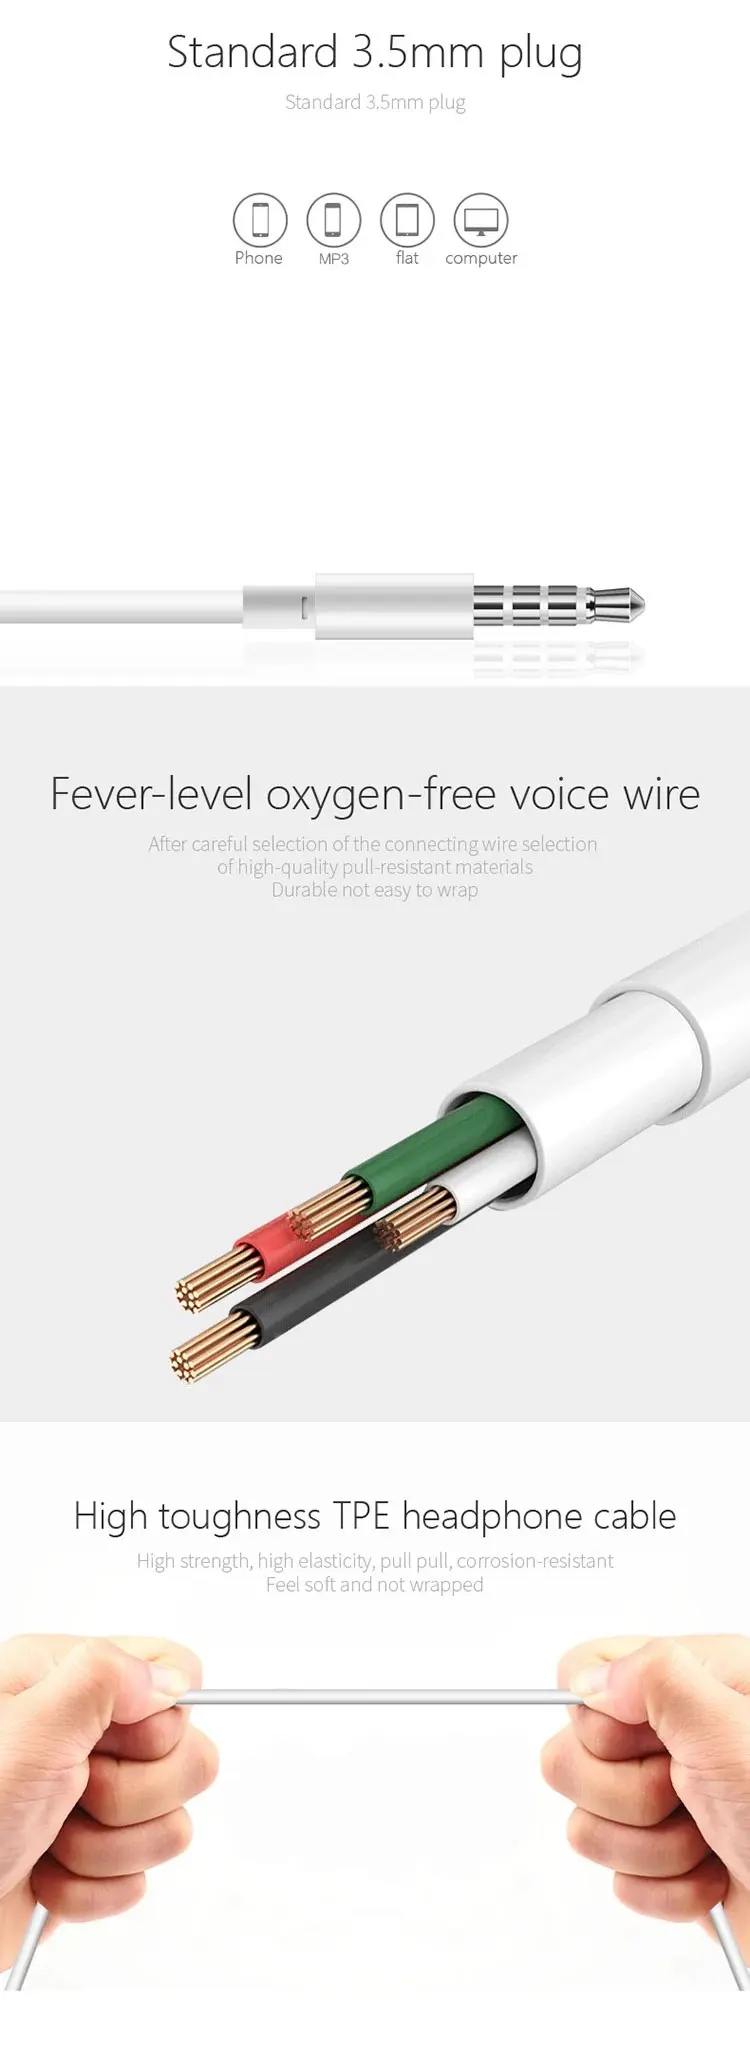 Shenzhen high quality low price earphones for mobile phone wired headphone,PVC in-ear wired cartoon earphone